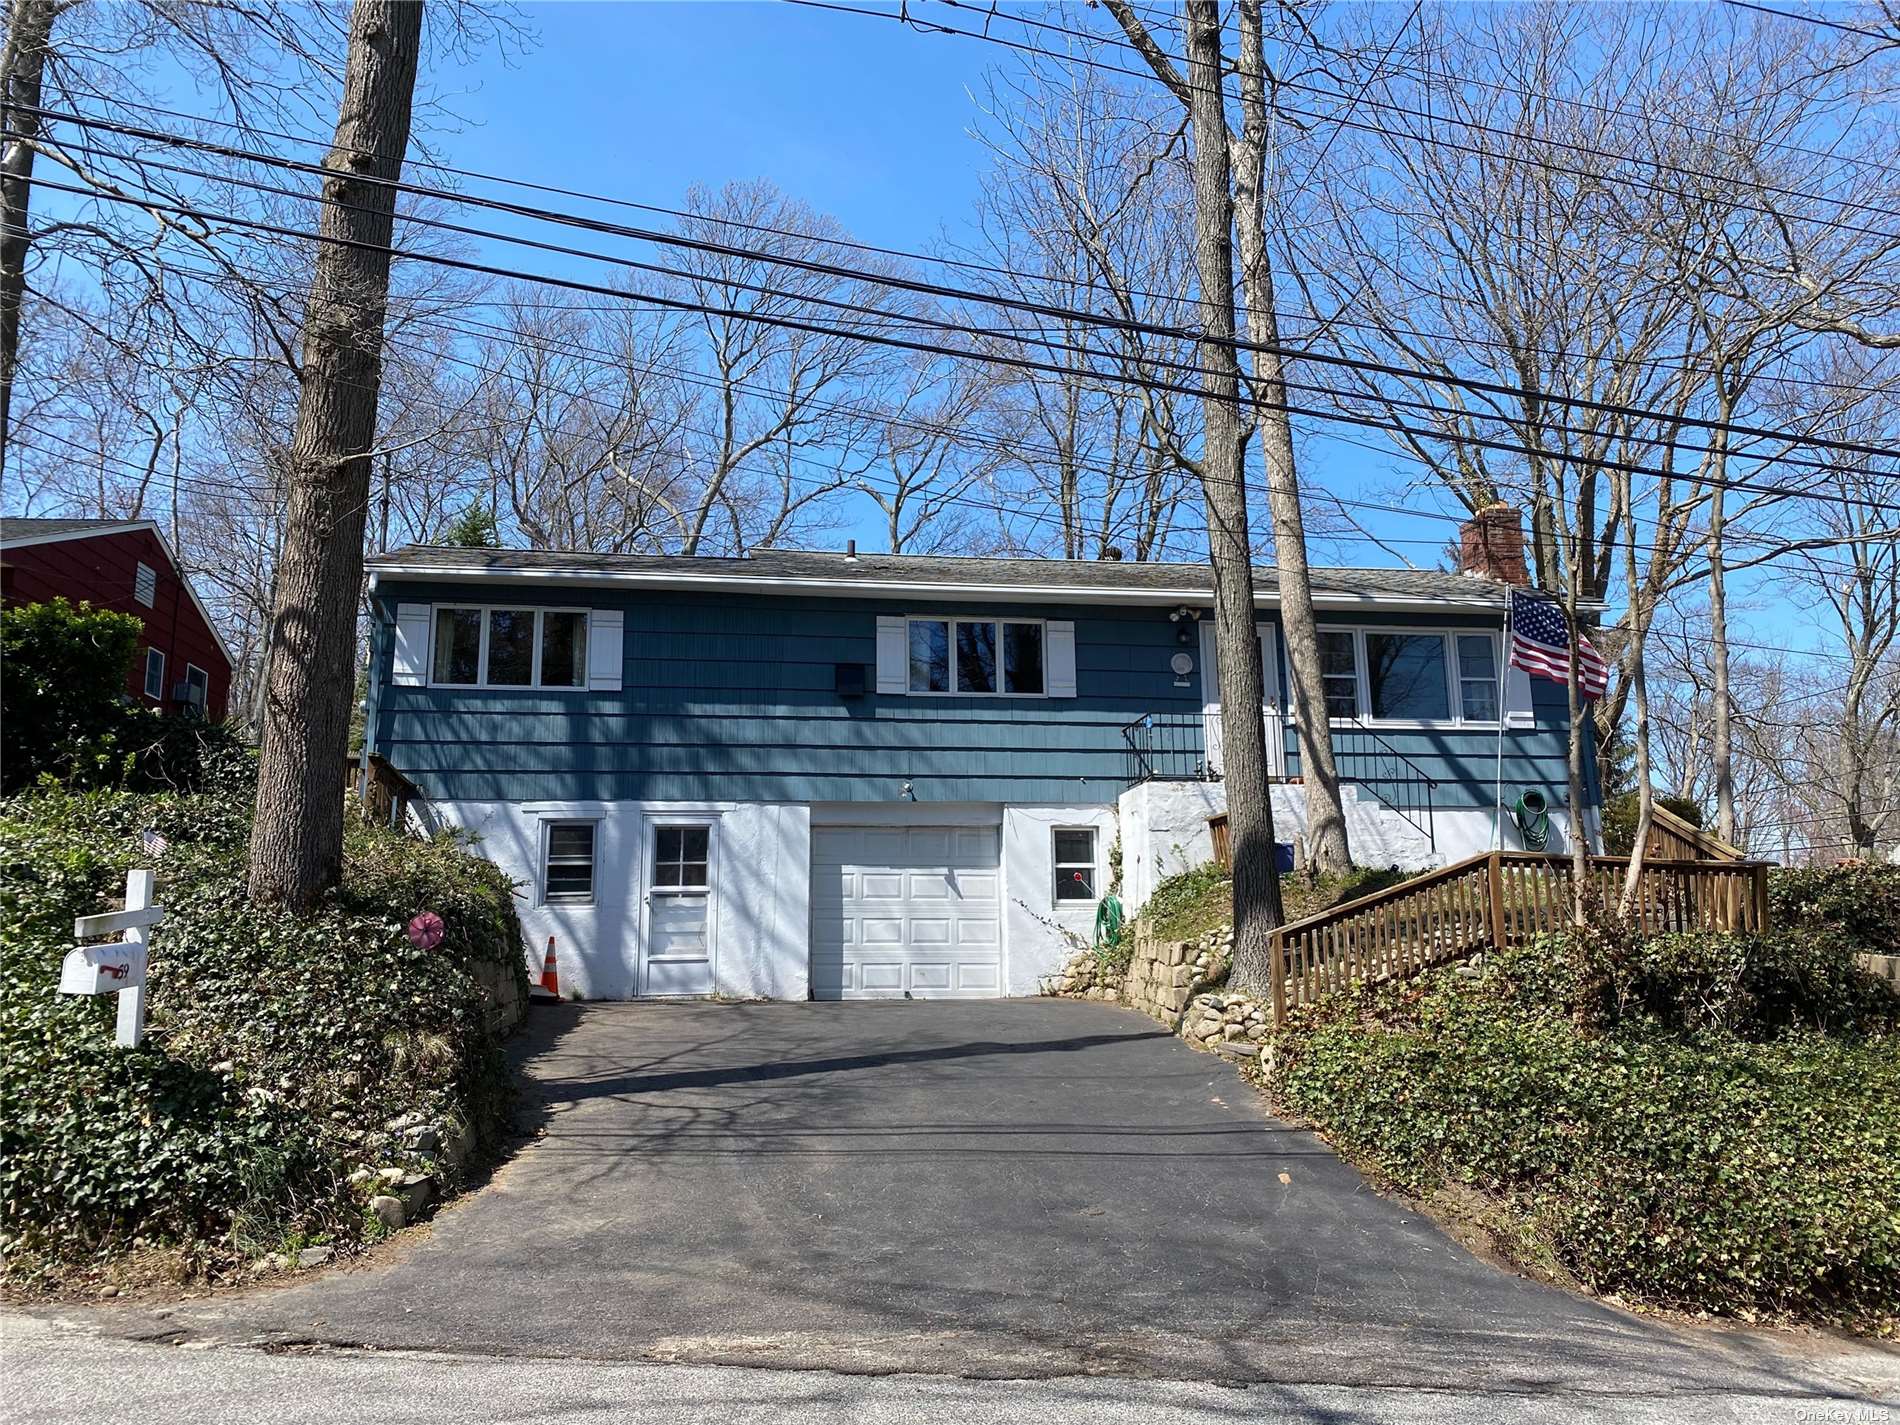 Listing in East Northport, NY